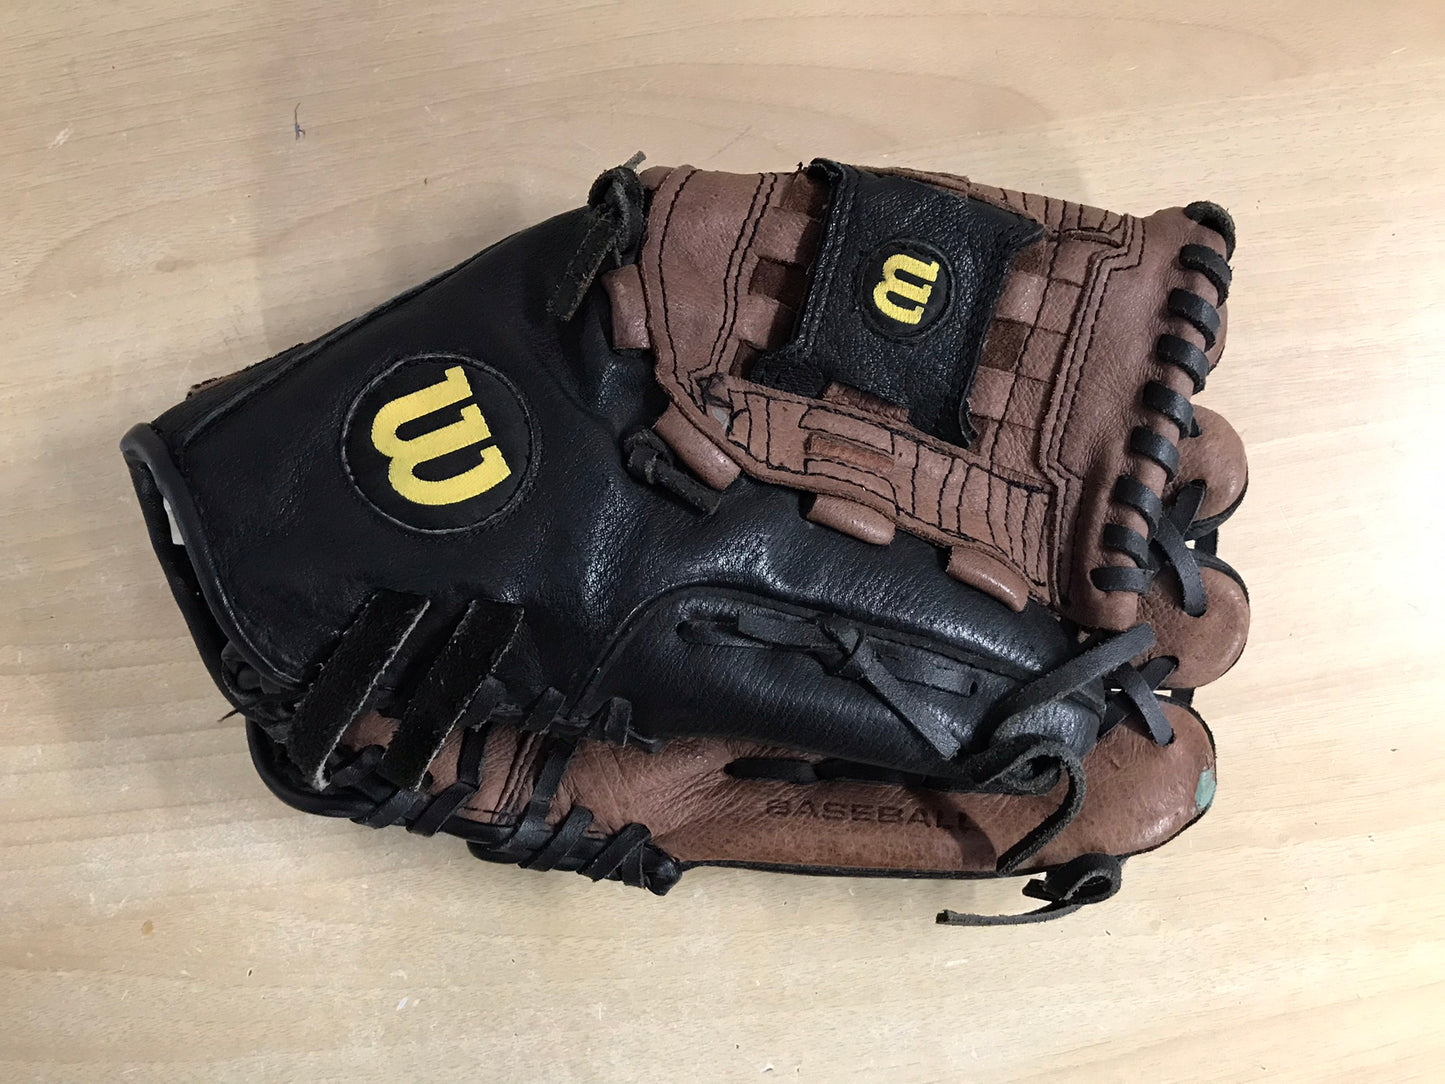 Baseball Glove Adult Size 12 inch Wilson A450 Black Brown Leather Fits on Left Hand Excellent